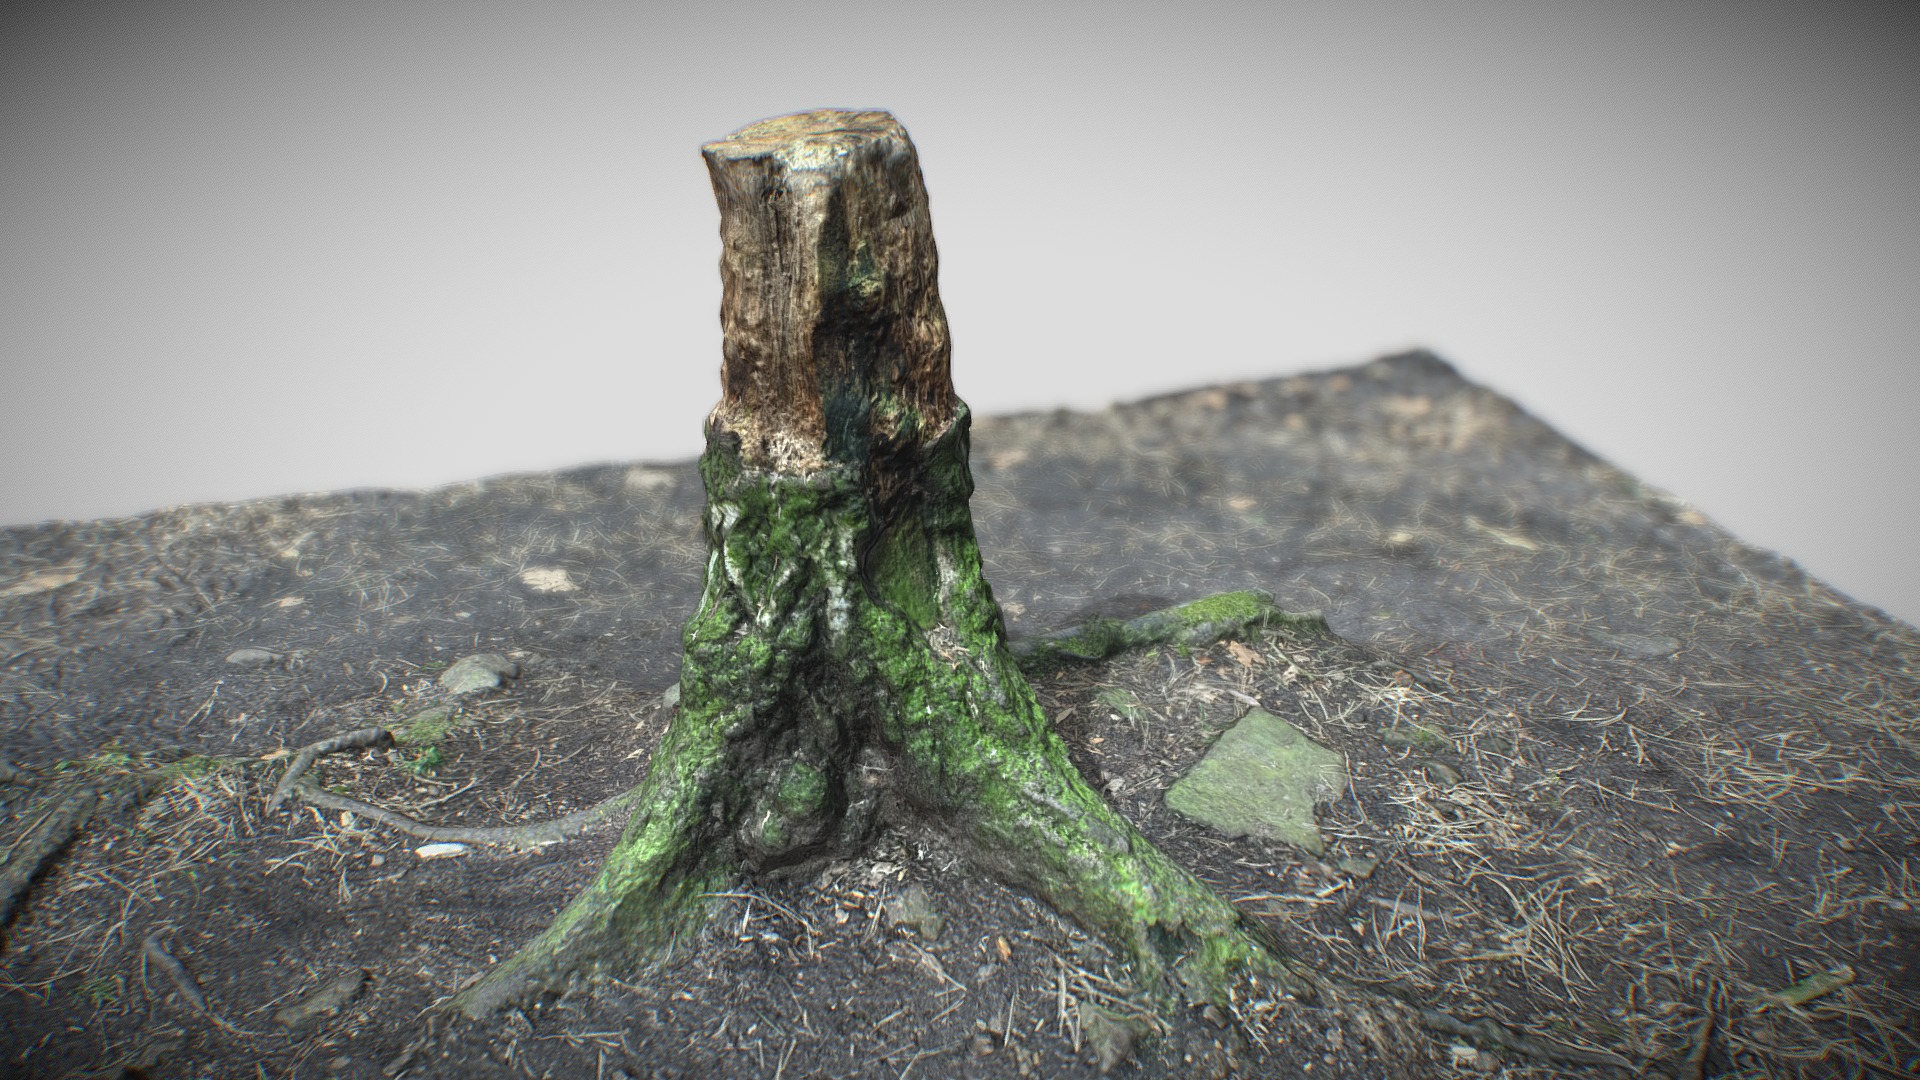 3D model Tree Stump – Medium Poly – Maps: 4096 by 4096 - This is a 3D model of the Tree Stump - Medium Poly - Maps: 4096 by 4096. The 3D model is about a tree stump on a rocky surface.